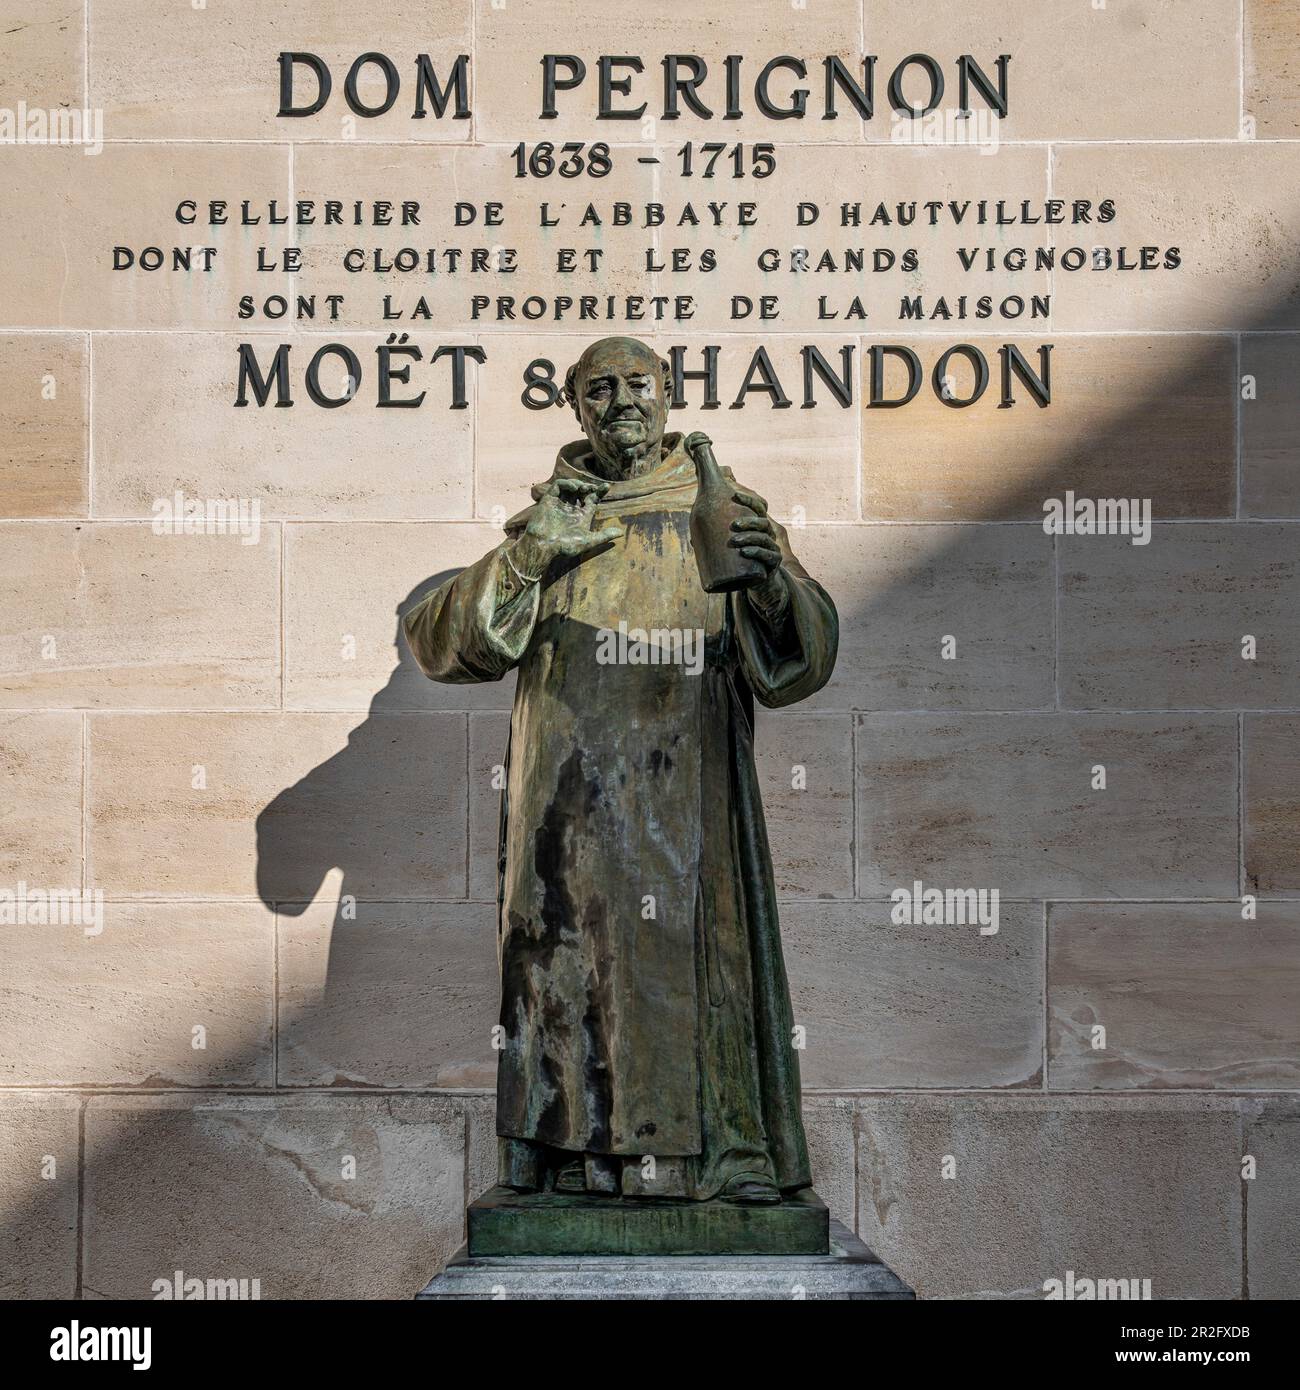 Statue of Dom Perignon, Moet et Chandon, LVMH, Louis Vuitton Moet Hennessy Group, Epernay, Champagne, France Stock Photo